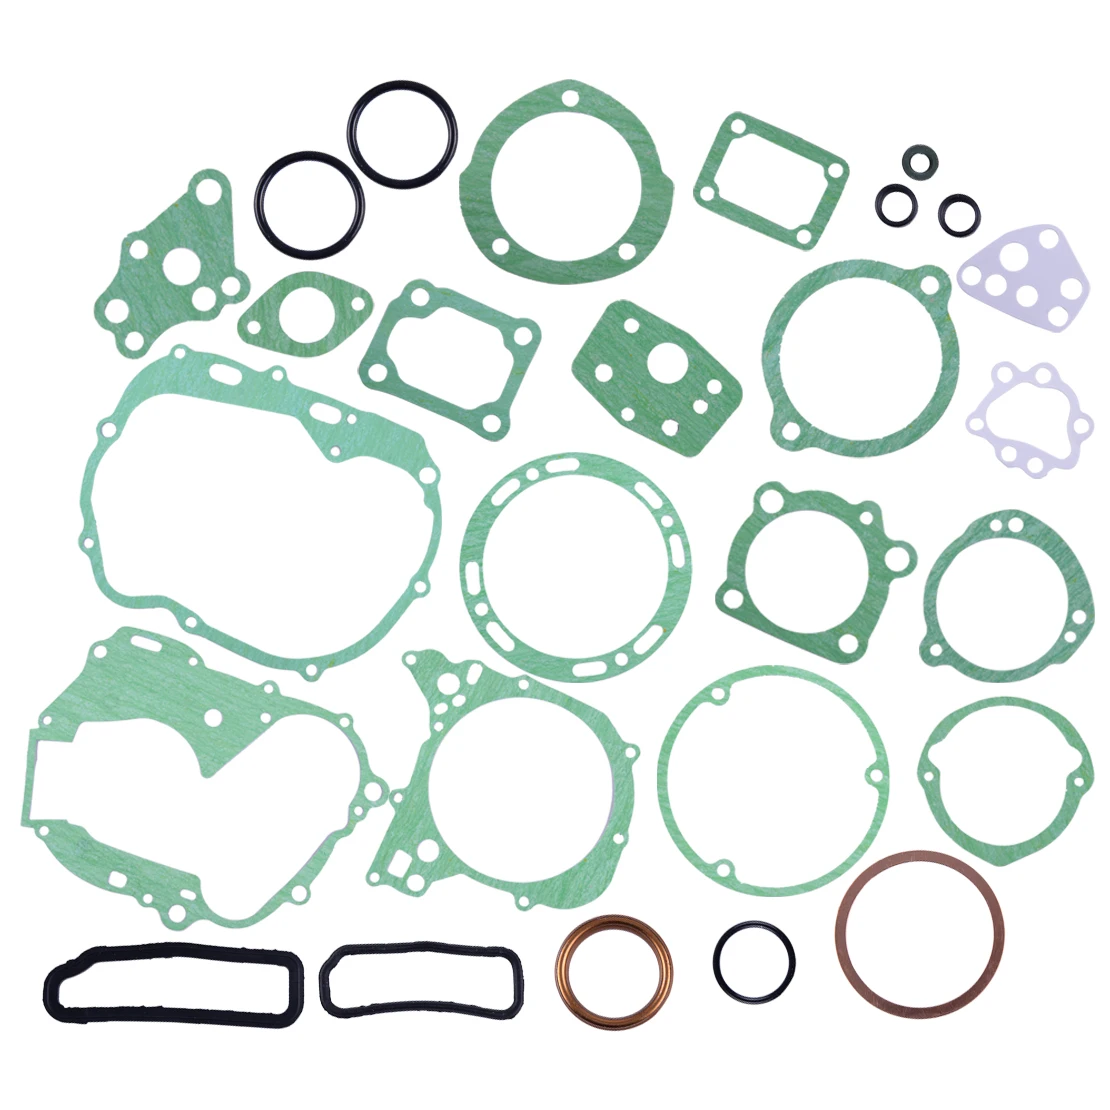 

CITALL 1 Set Motorcycle Complete Engine Gasket Seal Set fit for Honda CT90 CT 90 Trail 1966-1979